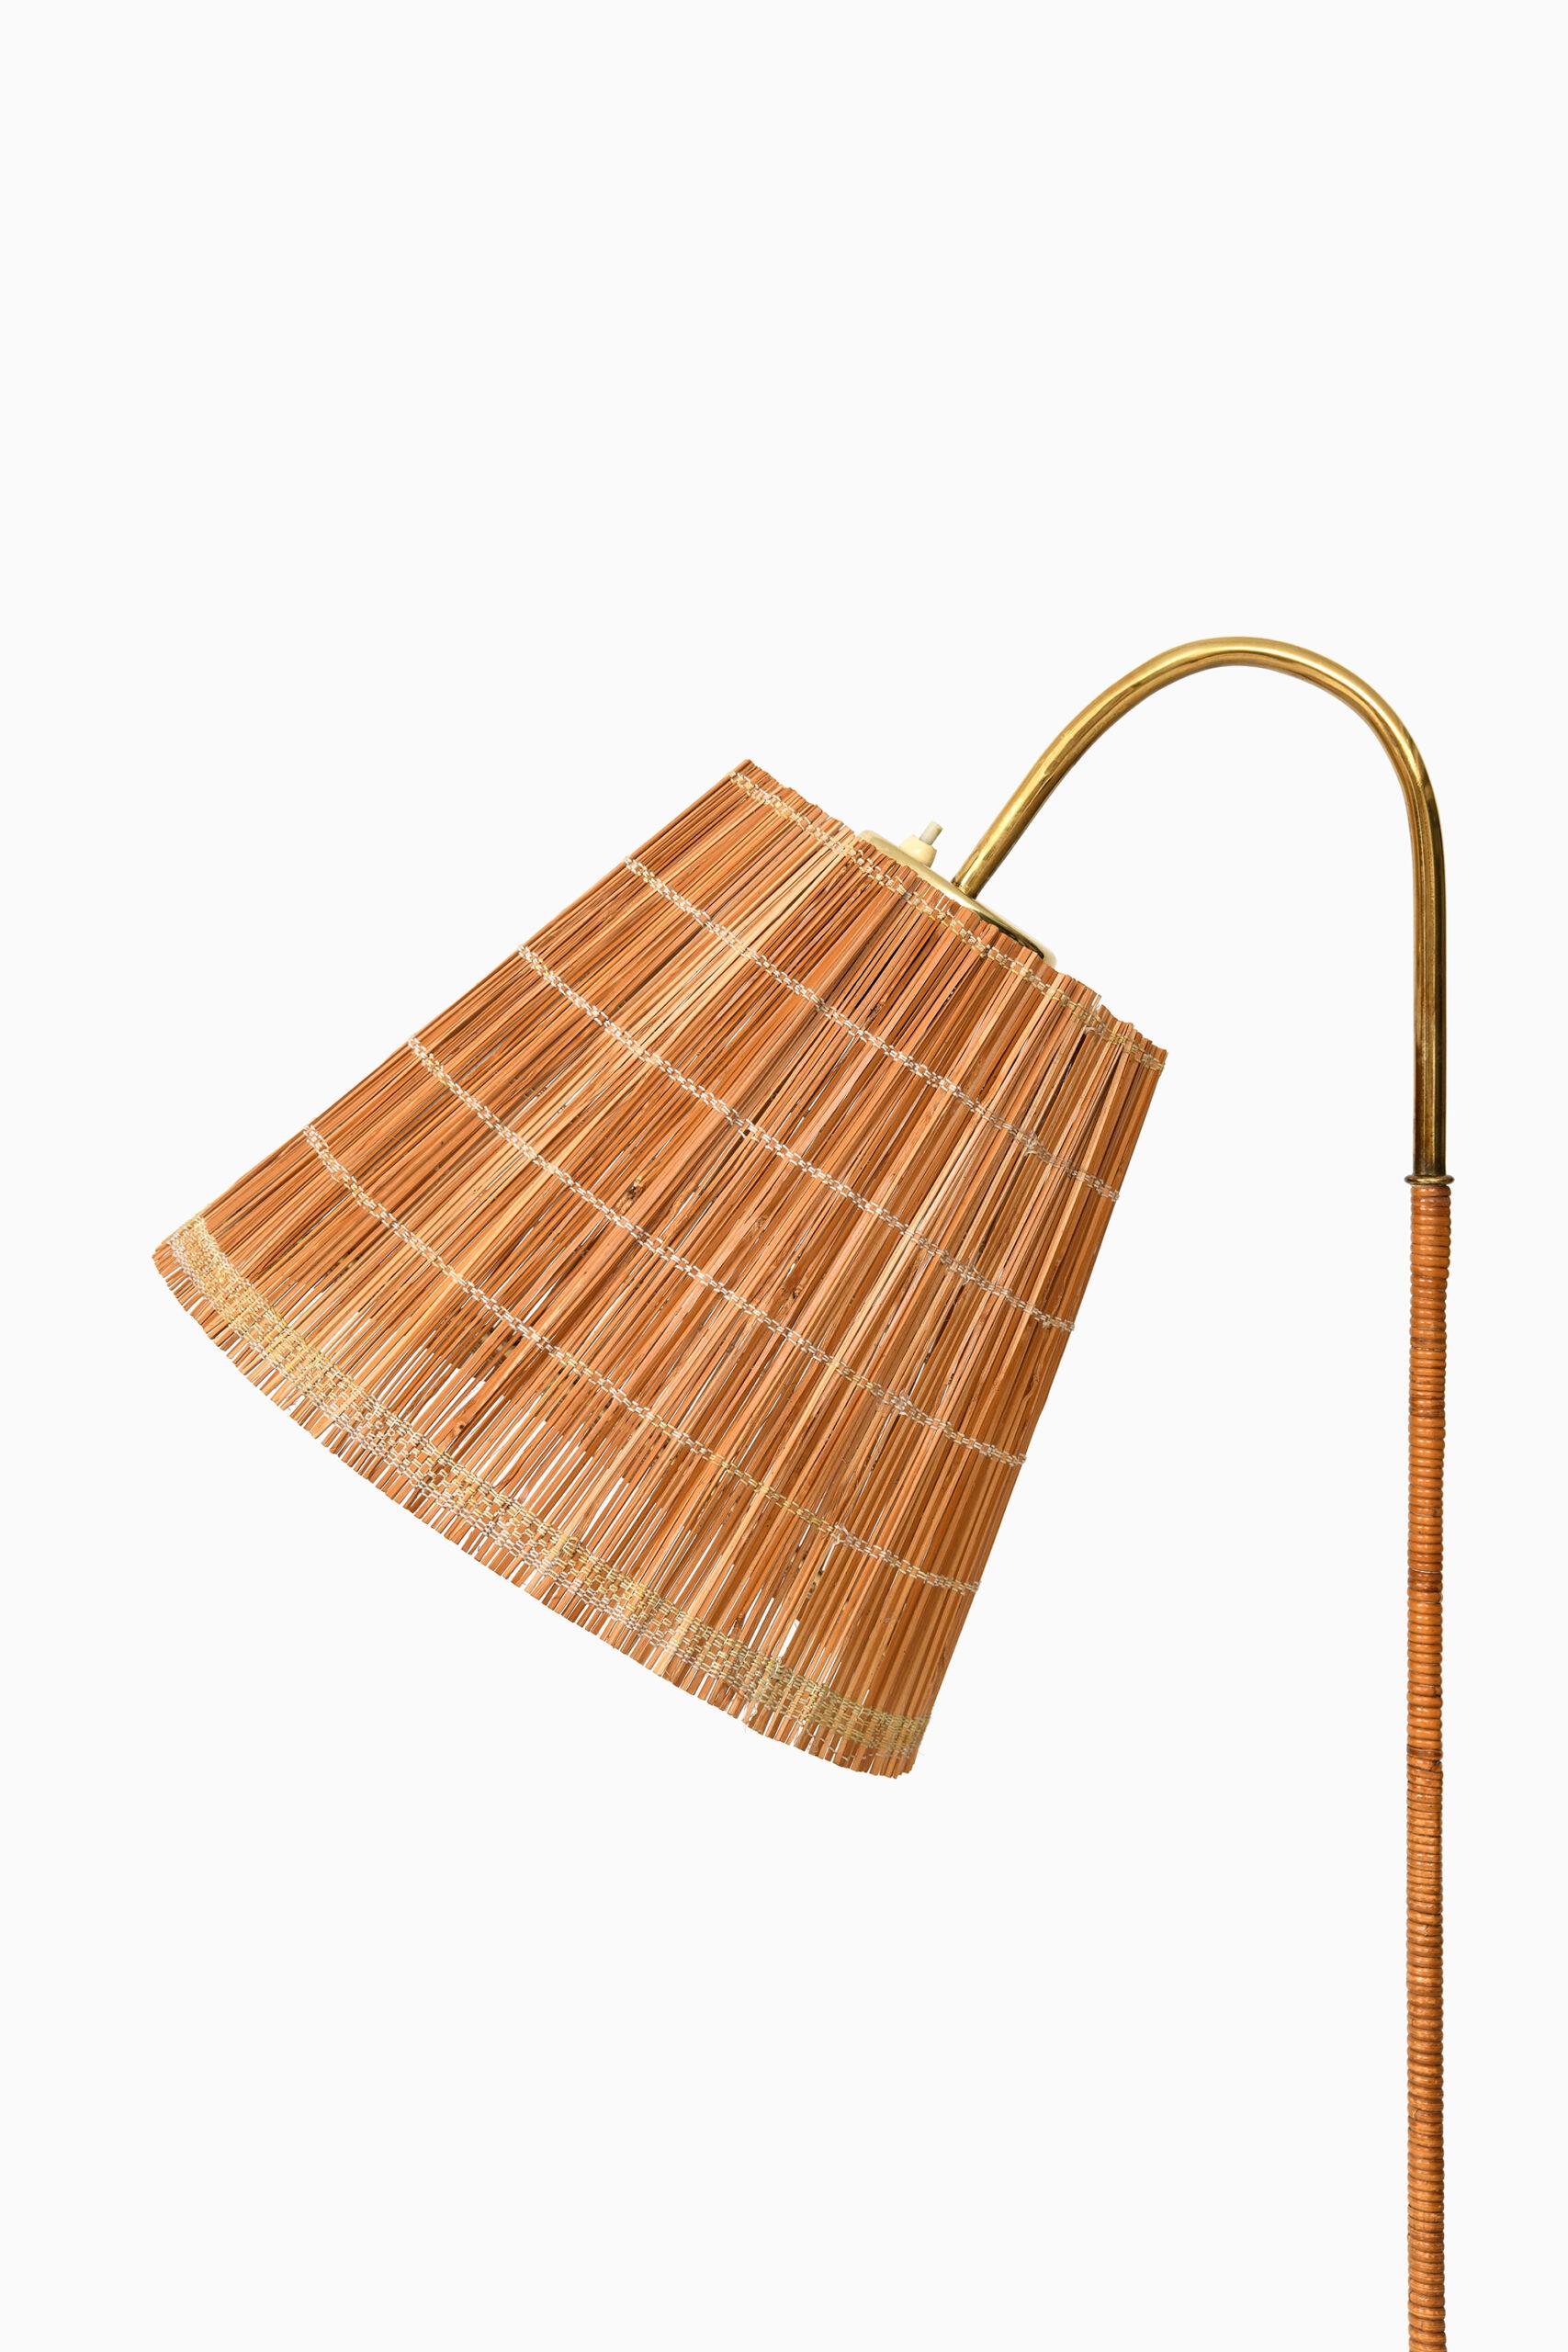 Scandinavian Modern Paavo Tynell Floor Lamps Model 9609 Produced by Taito Oy in Finland